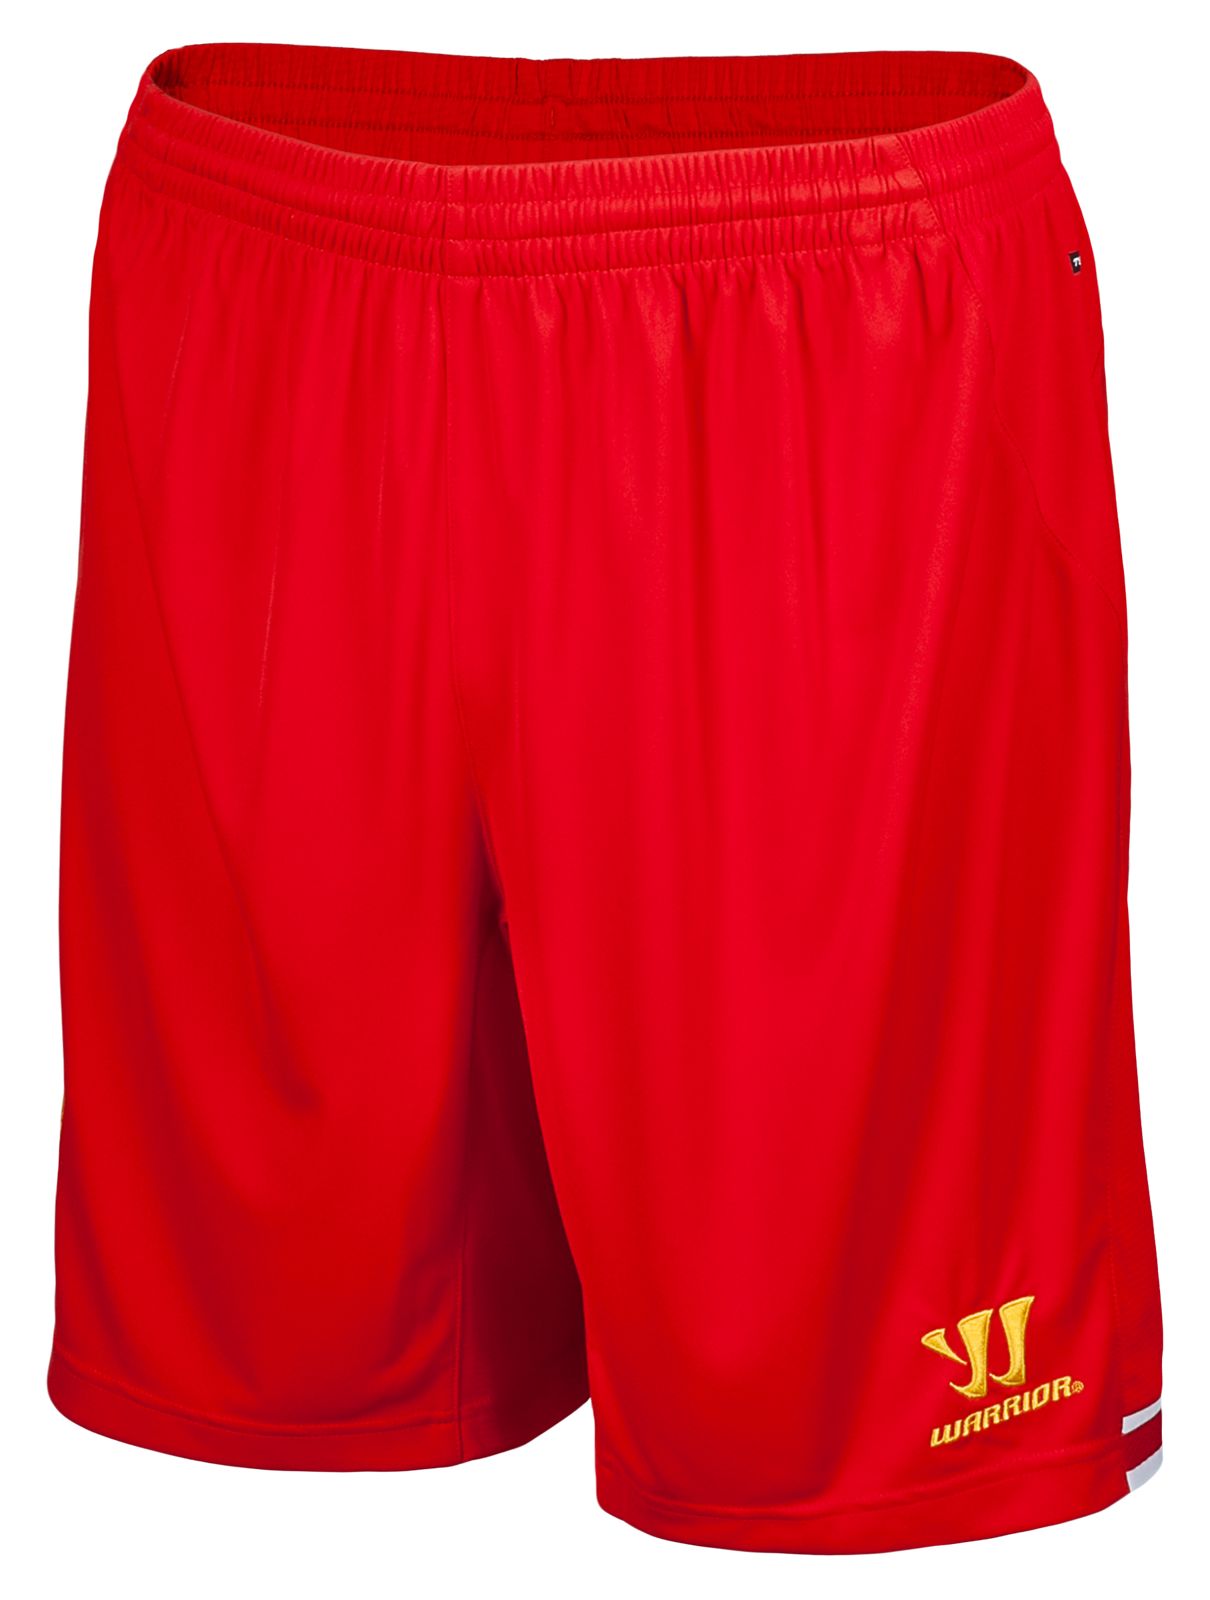 Liverpool Home Short 2013/14, High Risk Red with White & Amber Yellow image number 1